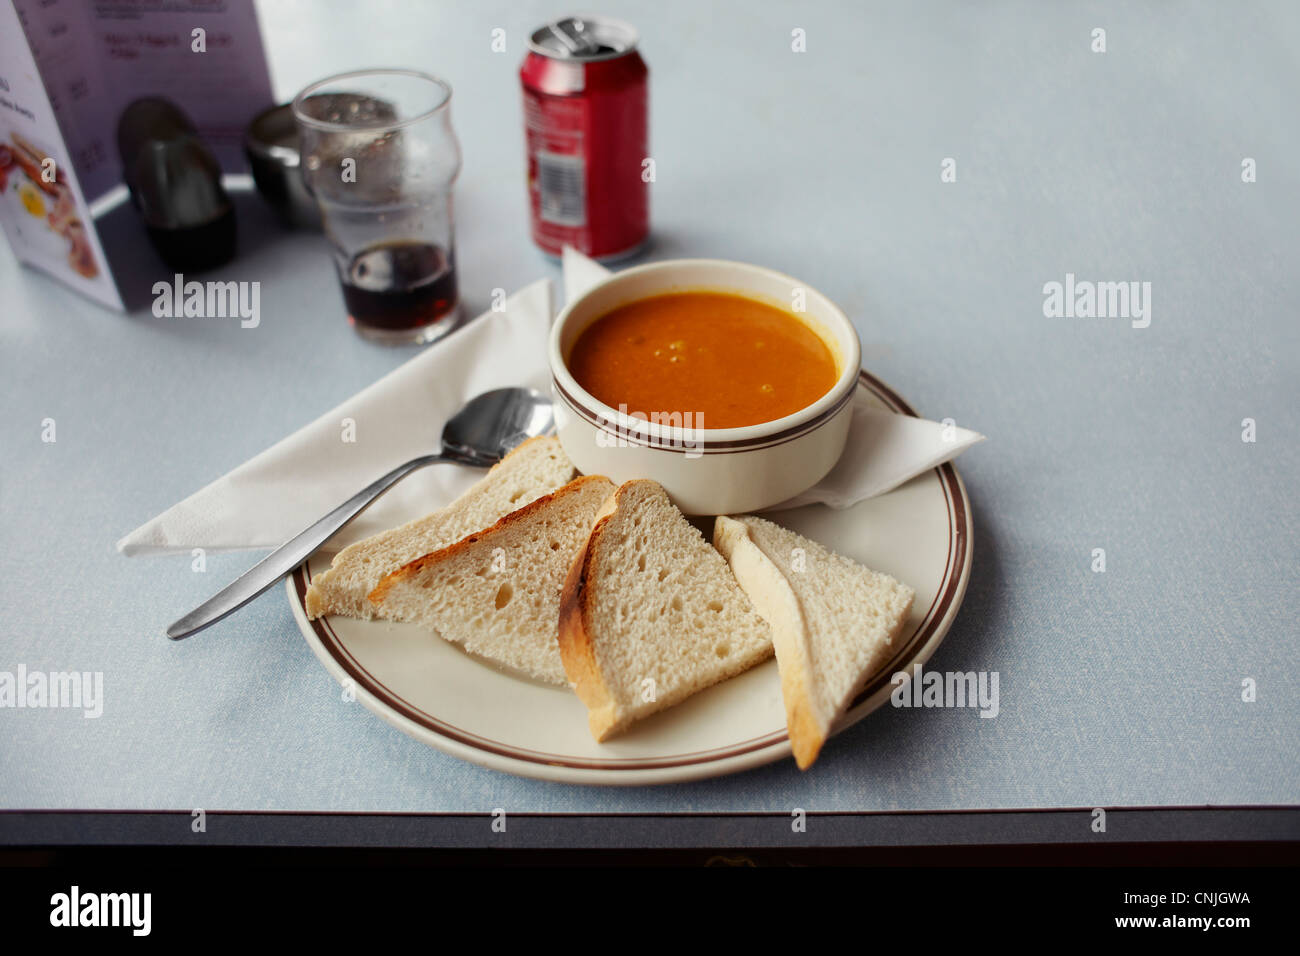 A bowl of soup with sliced bread and a cola drink in a cafe on table Stock Photo